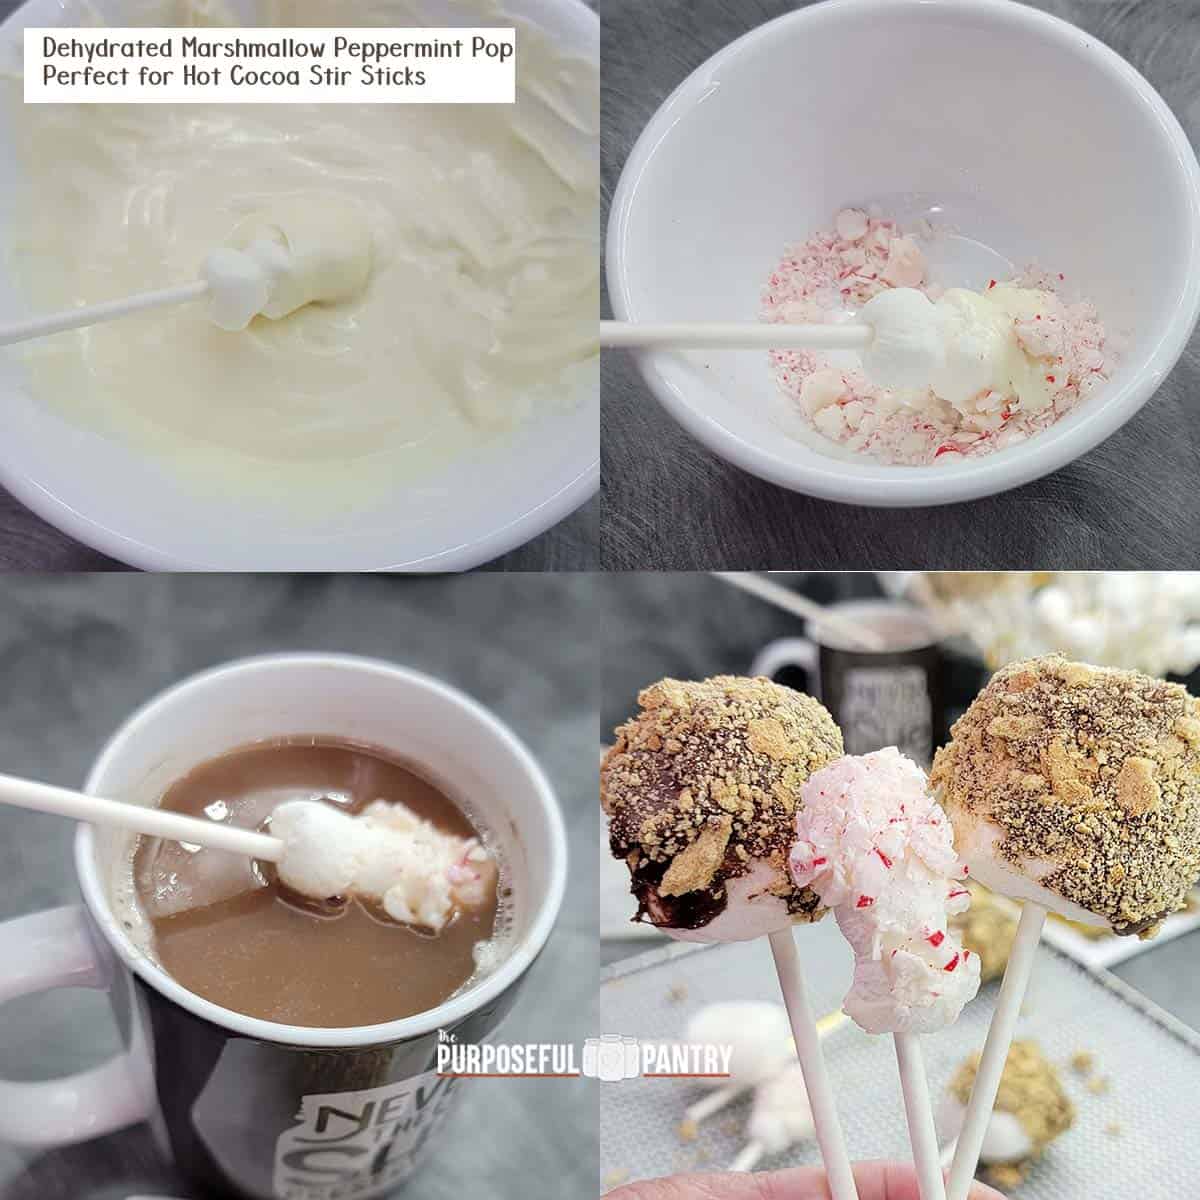 Marshmallow Pop Instructions - dip in chocolate, dip in topping, eat !